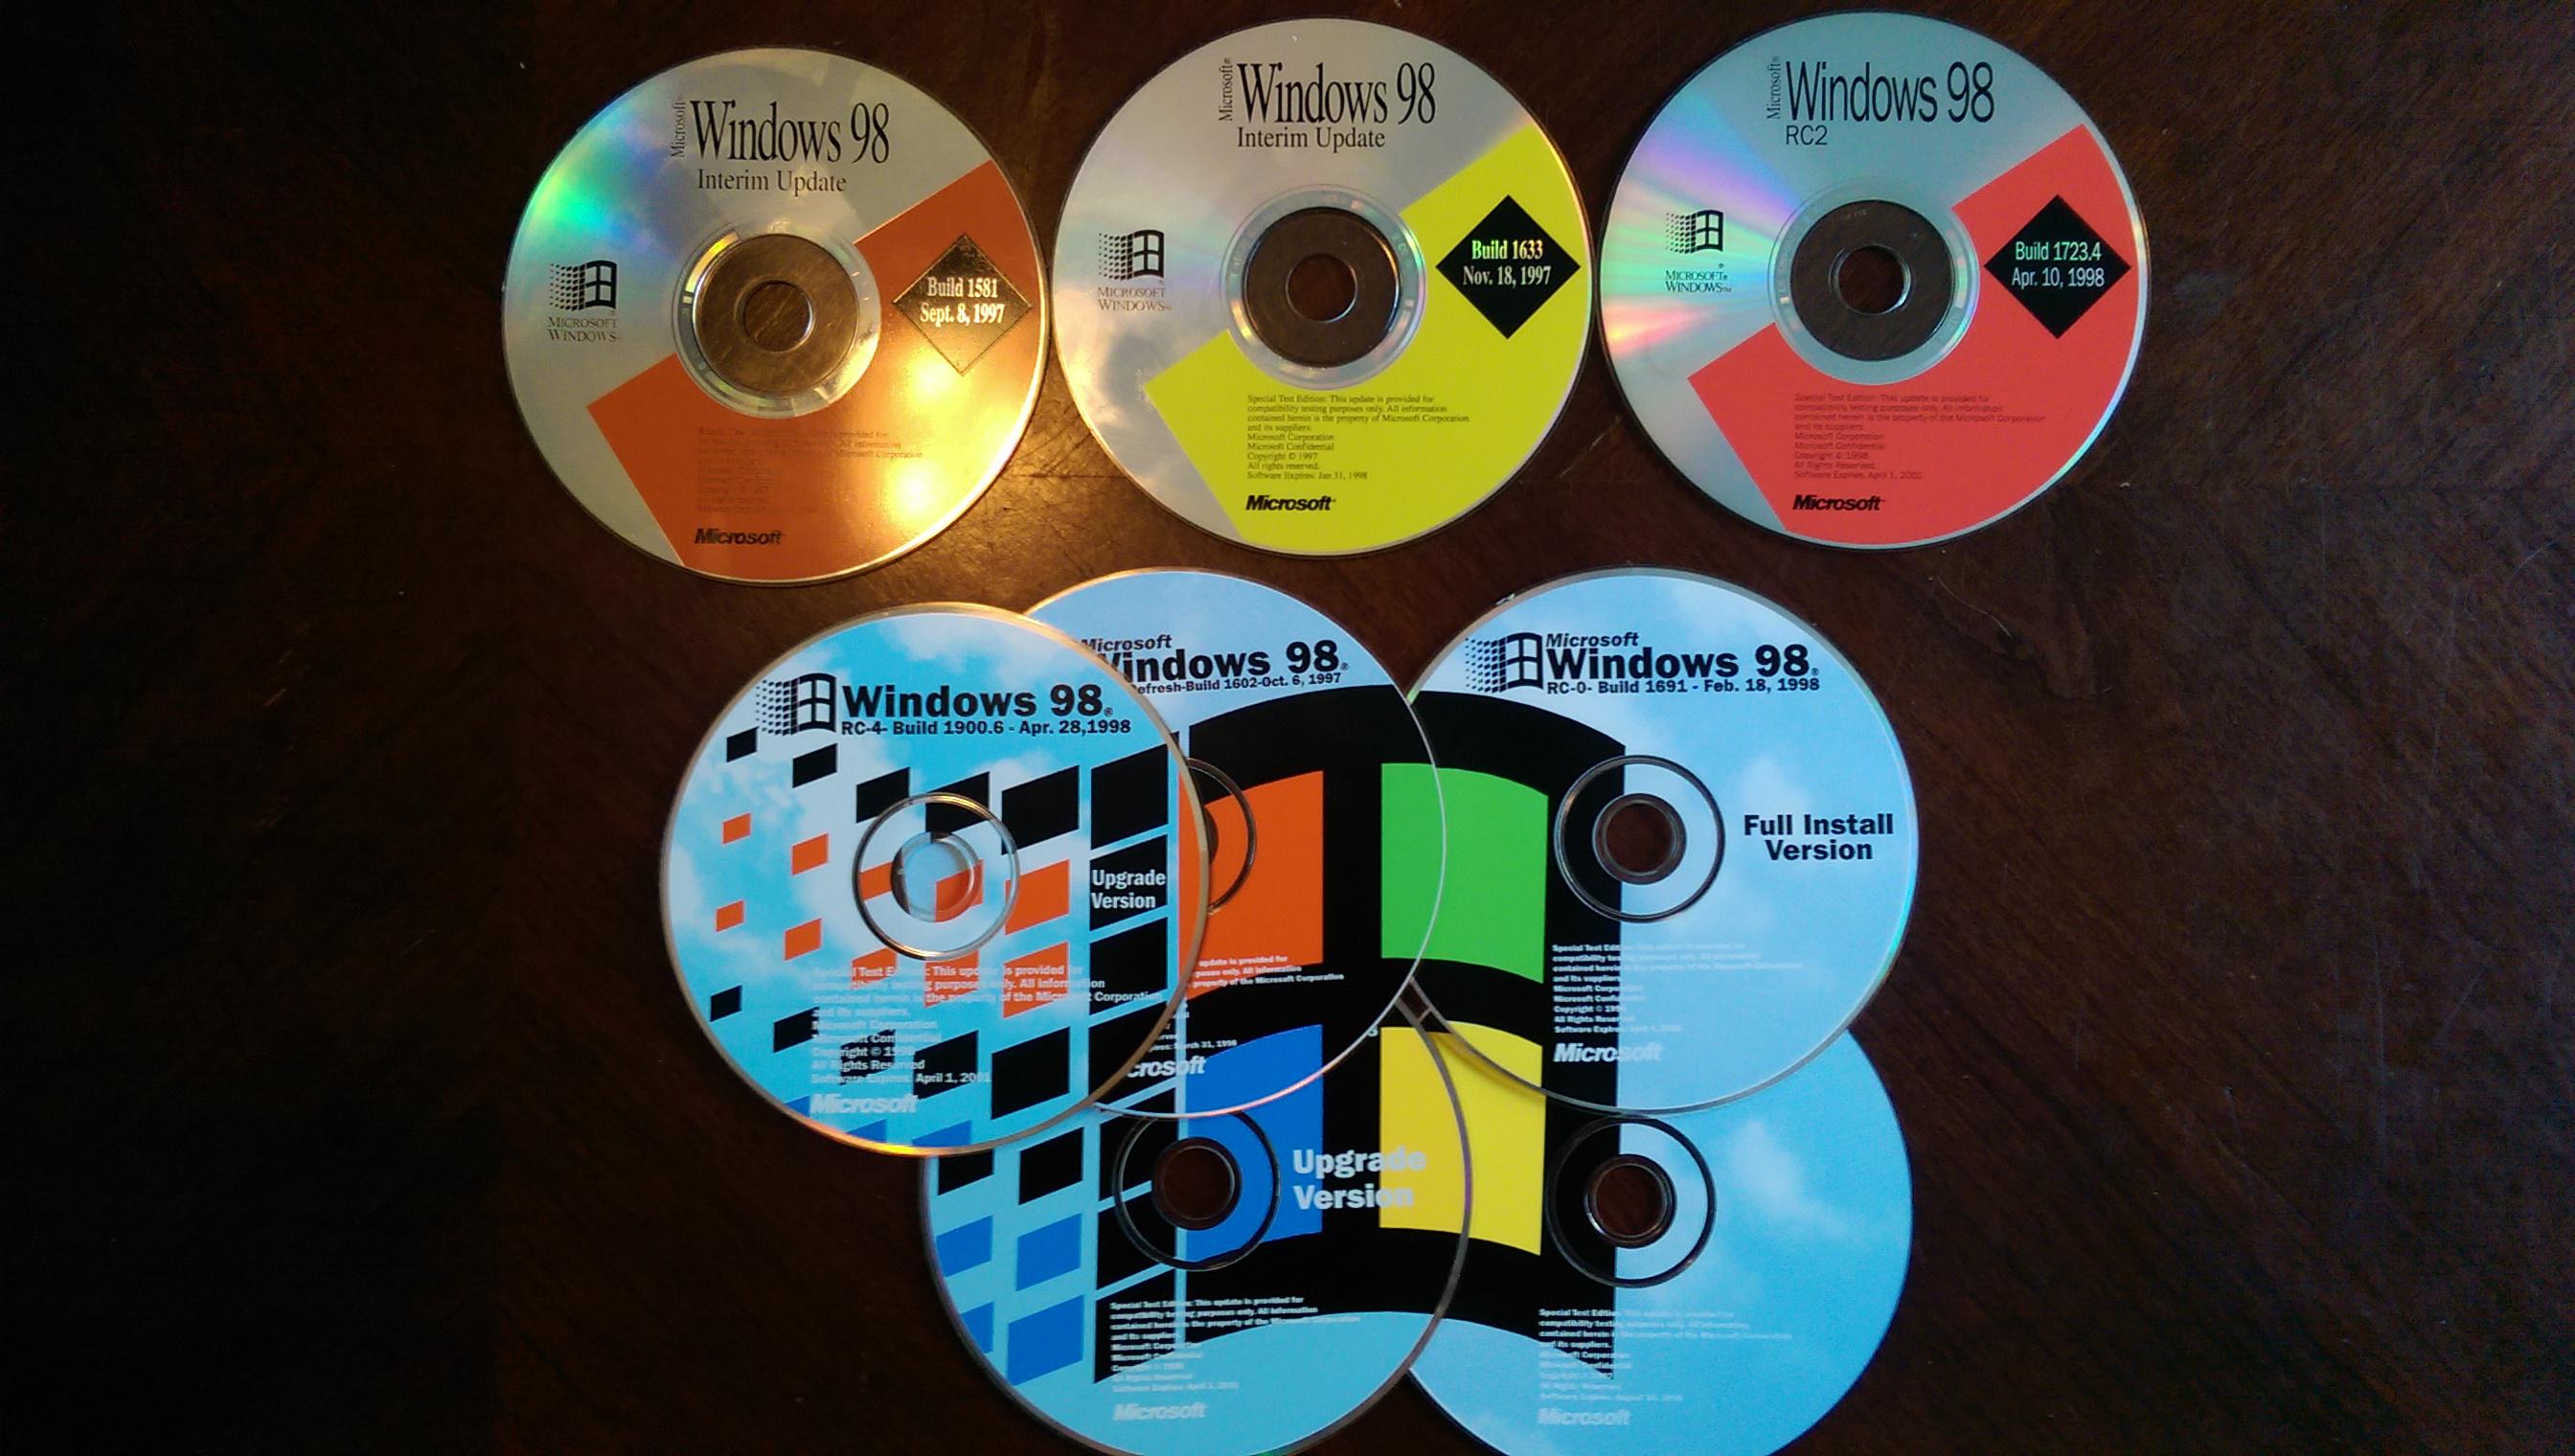 Coming Soon) Windows 95 Build 420, 98 build 1633, and more - Page 